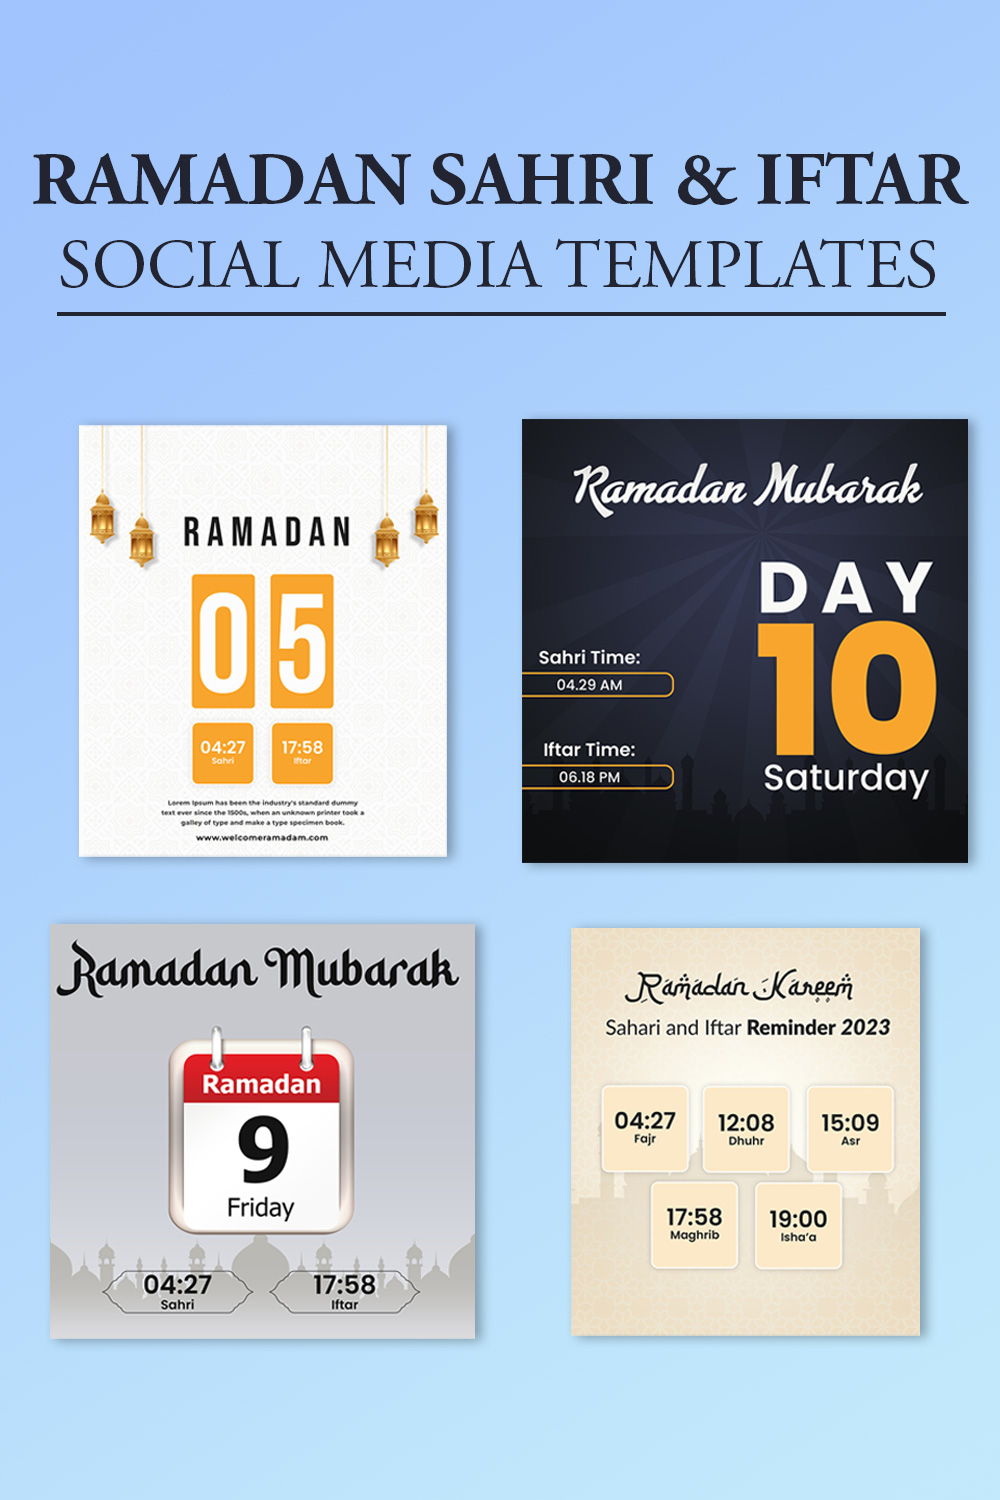 Ramadan sahri and iftar schedule post template PSD set for social media post pinterest preview image.